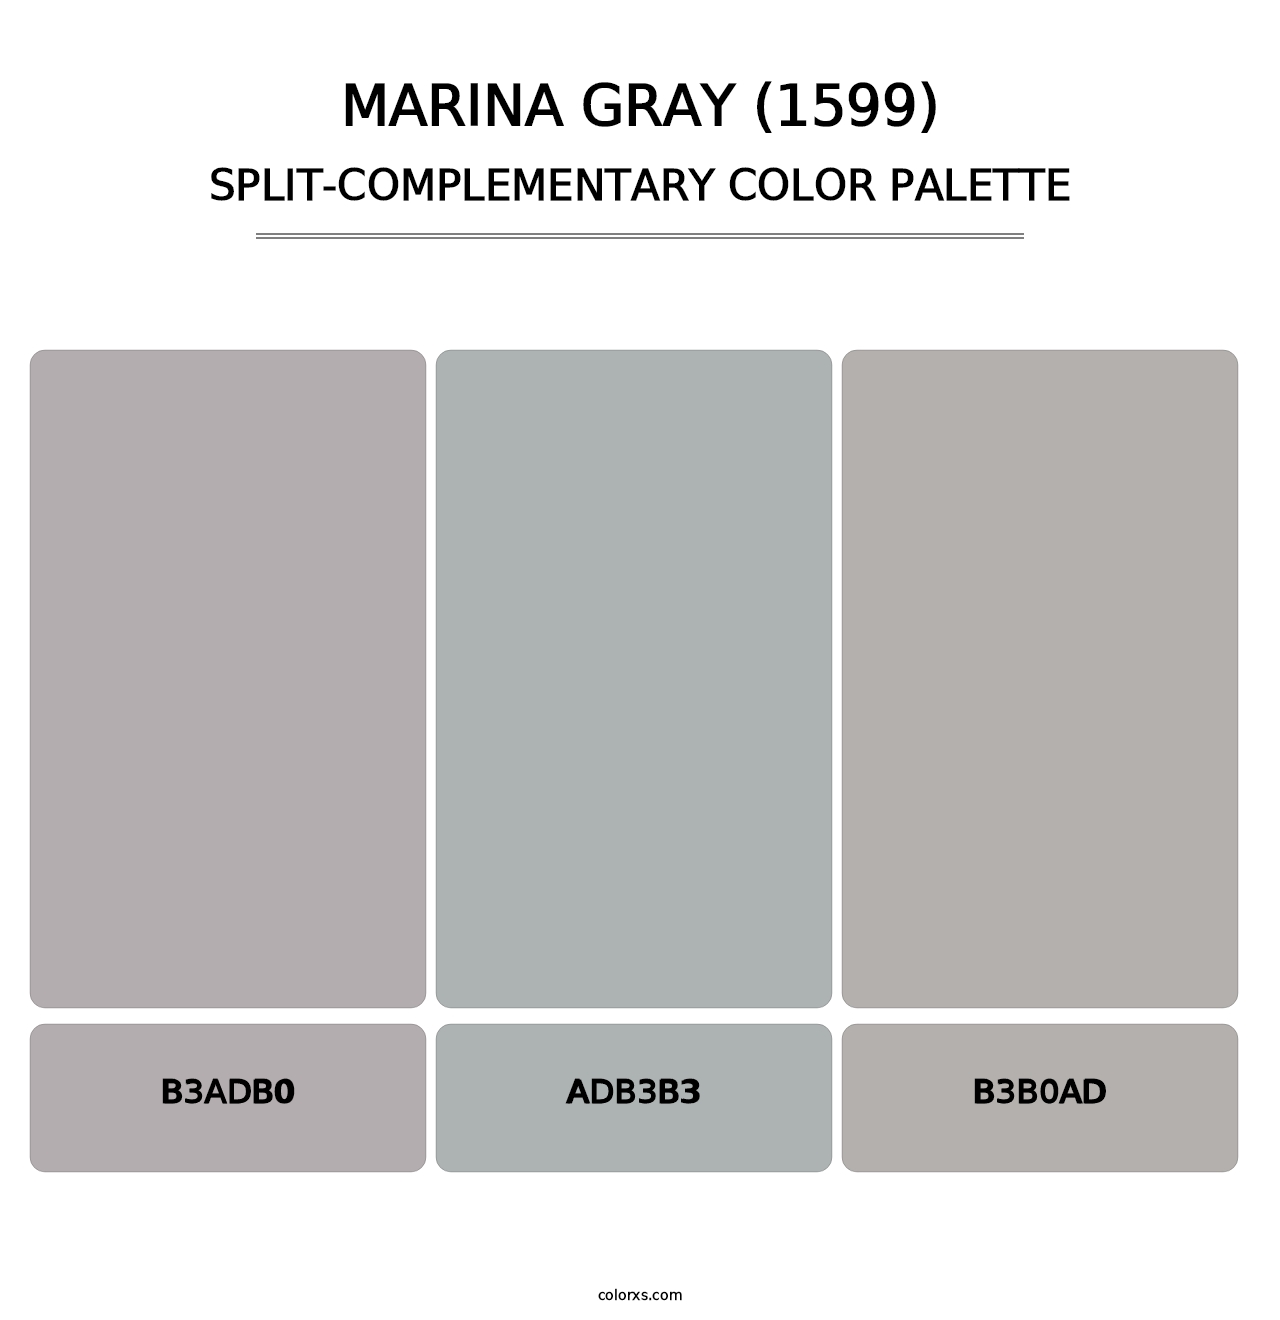 Marina Gray (1599) - Split-Complementary Color Palette